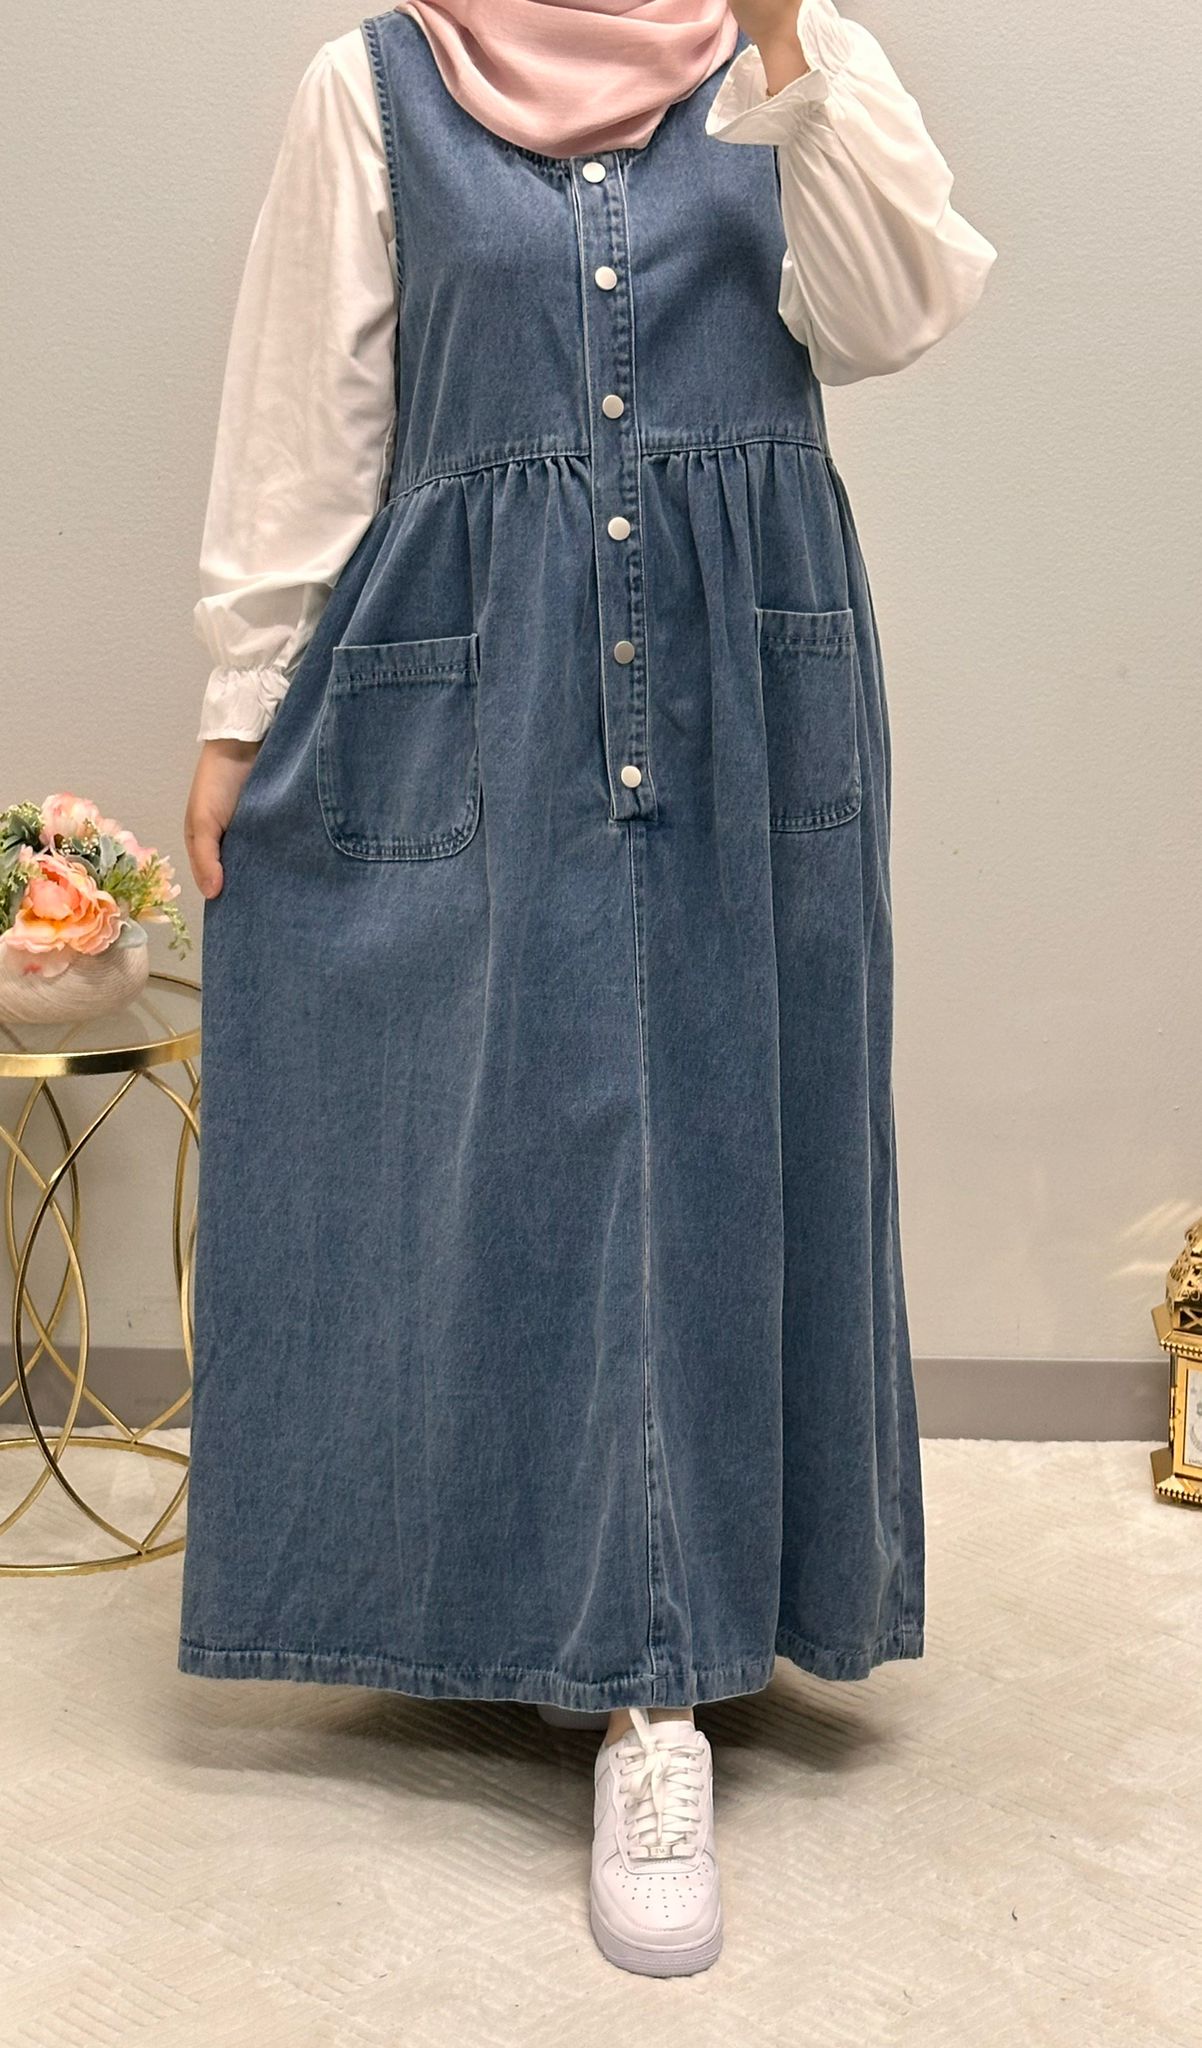 Two-pieces jeans dress with white shirt underneath